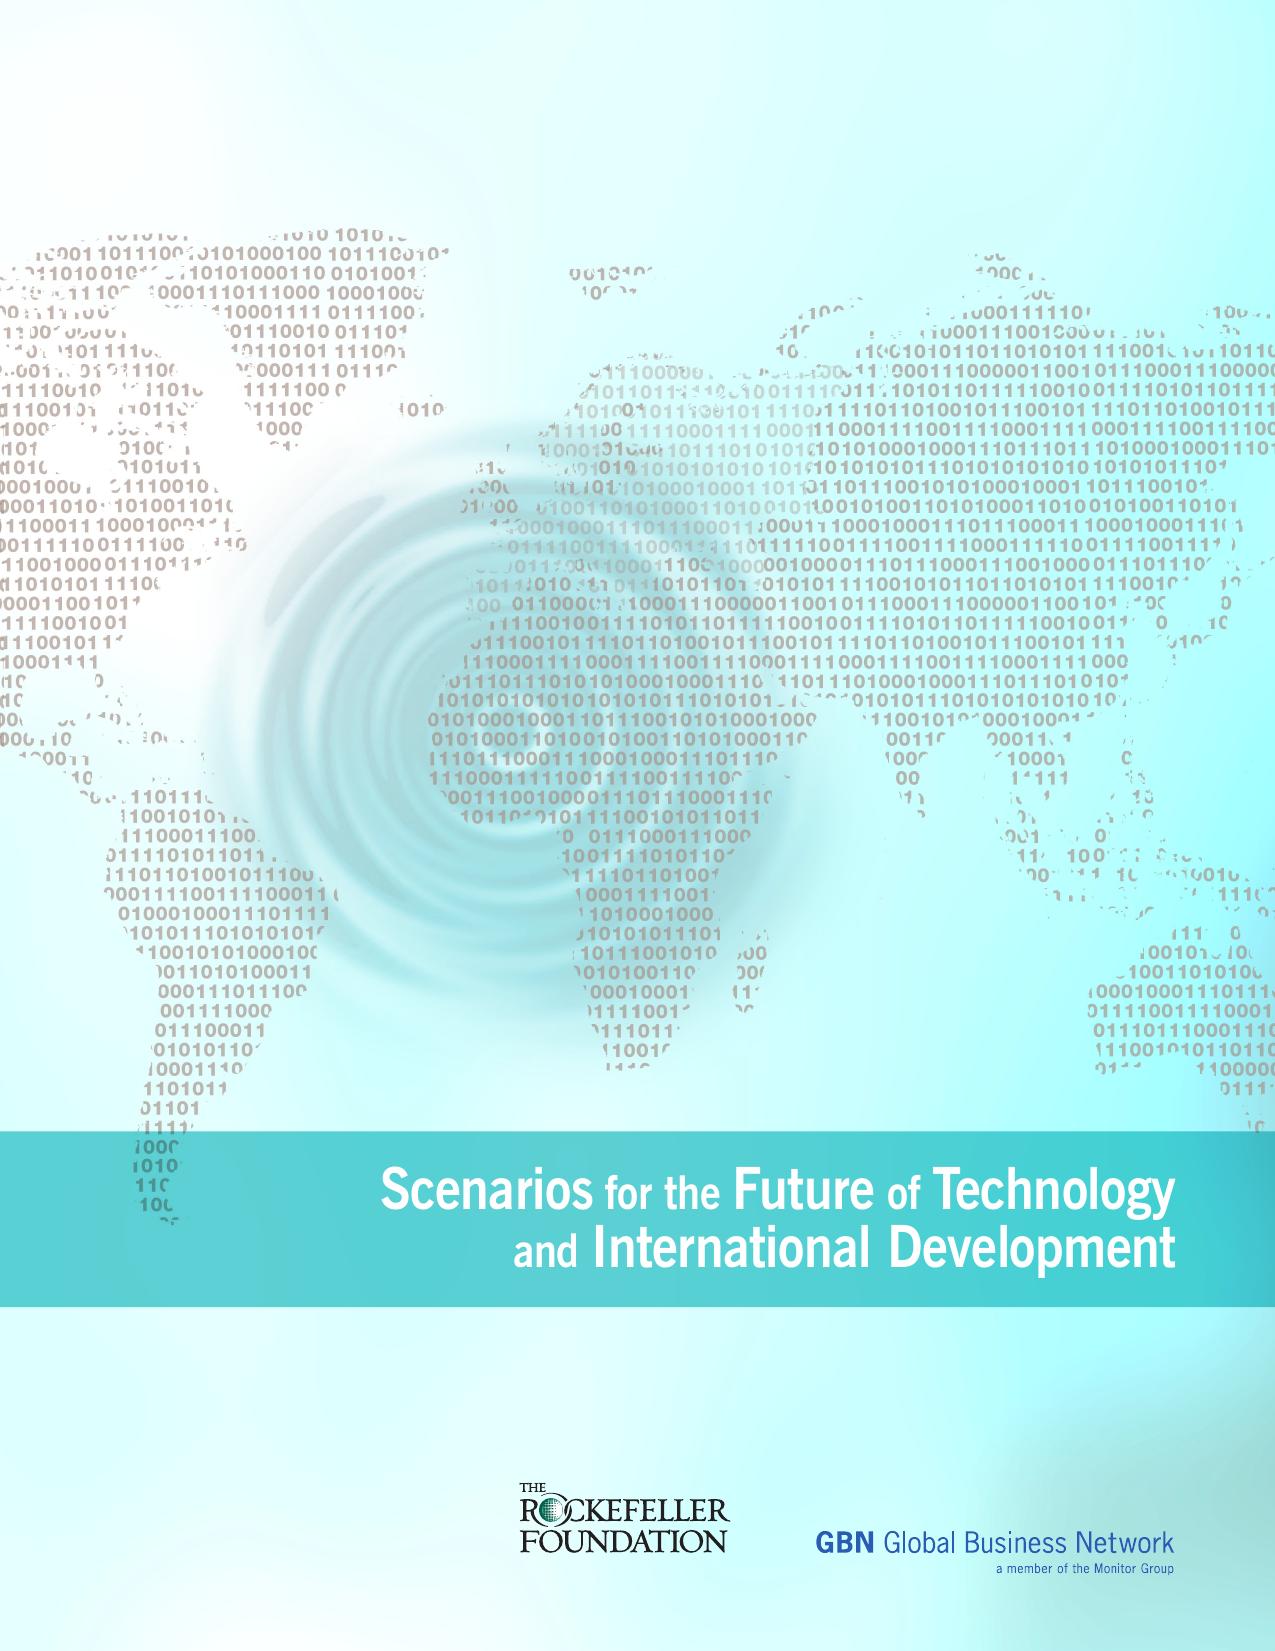 Scenarios for the Future of Technology and International Development (2010) by Rockefeller Foundation